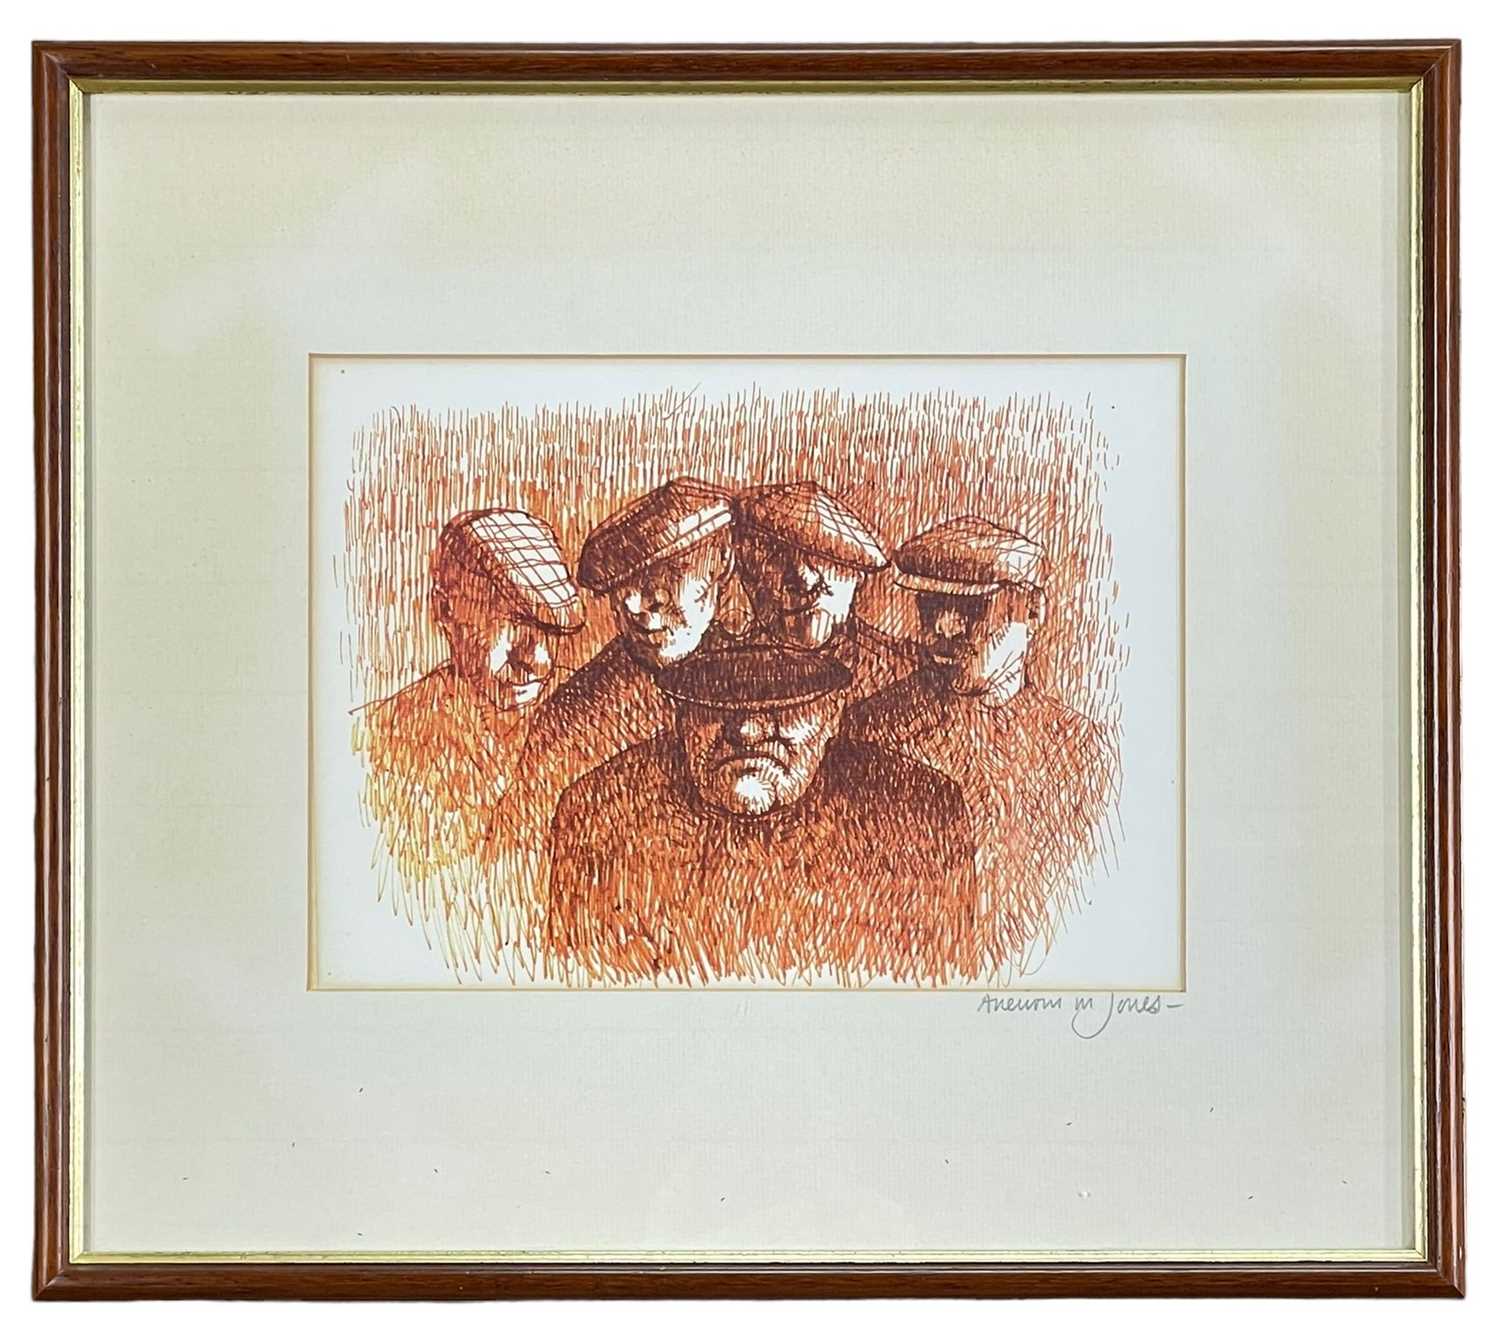 ‡ ANEURIN JONES (Welsh 1930-2017) monochrome print - farmers in flat caps, mount signed in pencil, - Image 2 of 2